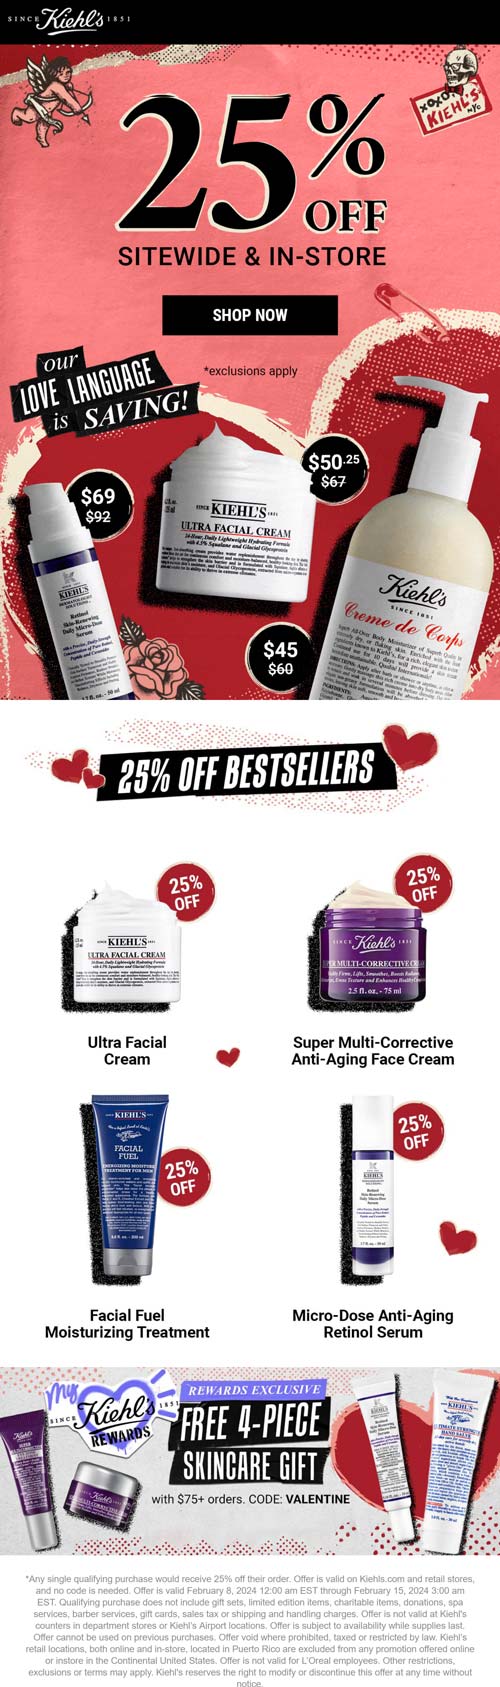 Kiehls stores Coupon  25% off at Kiehls, ditto online + free 4pc on $75 via promo code VALENTINE #kiehls 